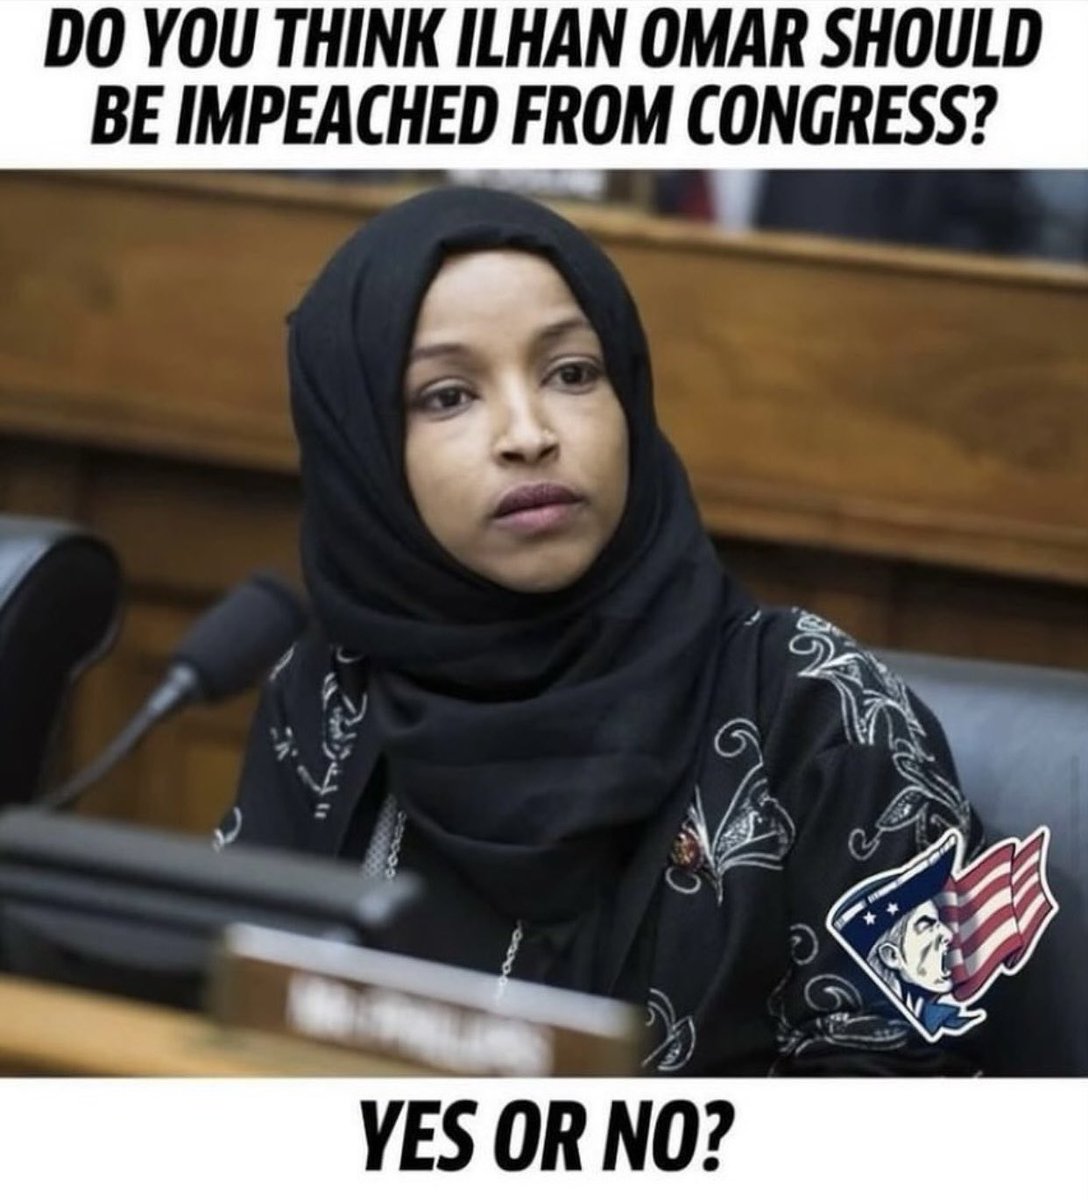 Who thinks this anti-American POS should have never made it to Congress in the first place?